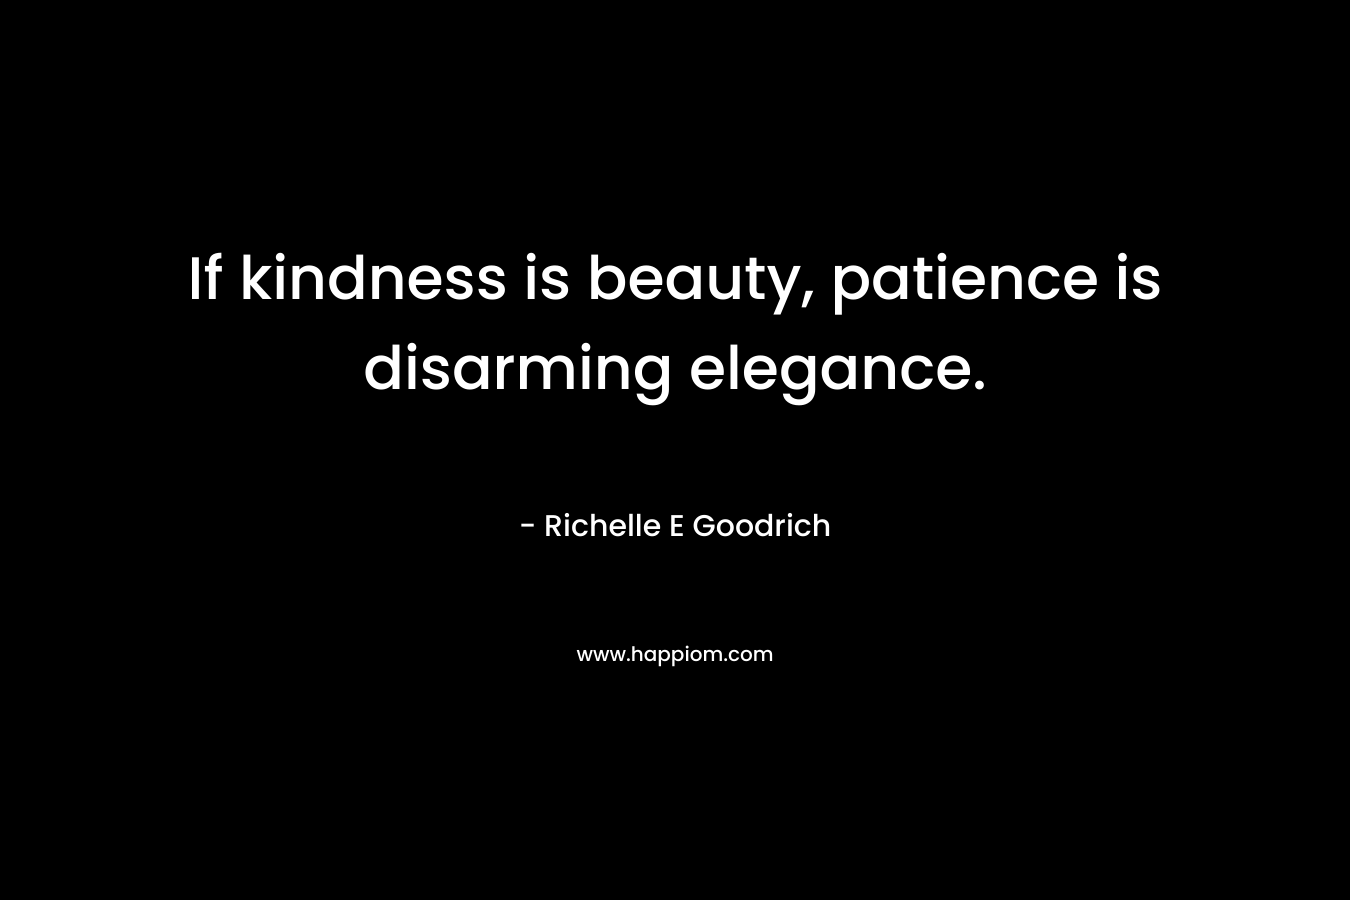 If kindness is beauty, patience is disarming elegance. – Richelle E Goodrich